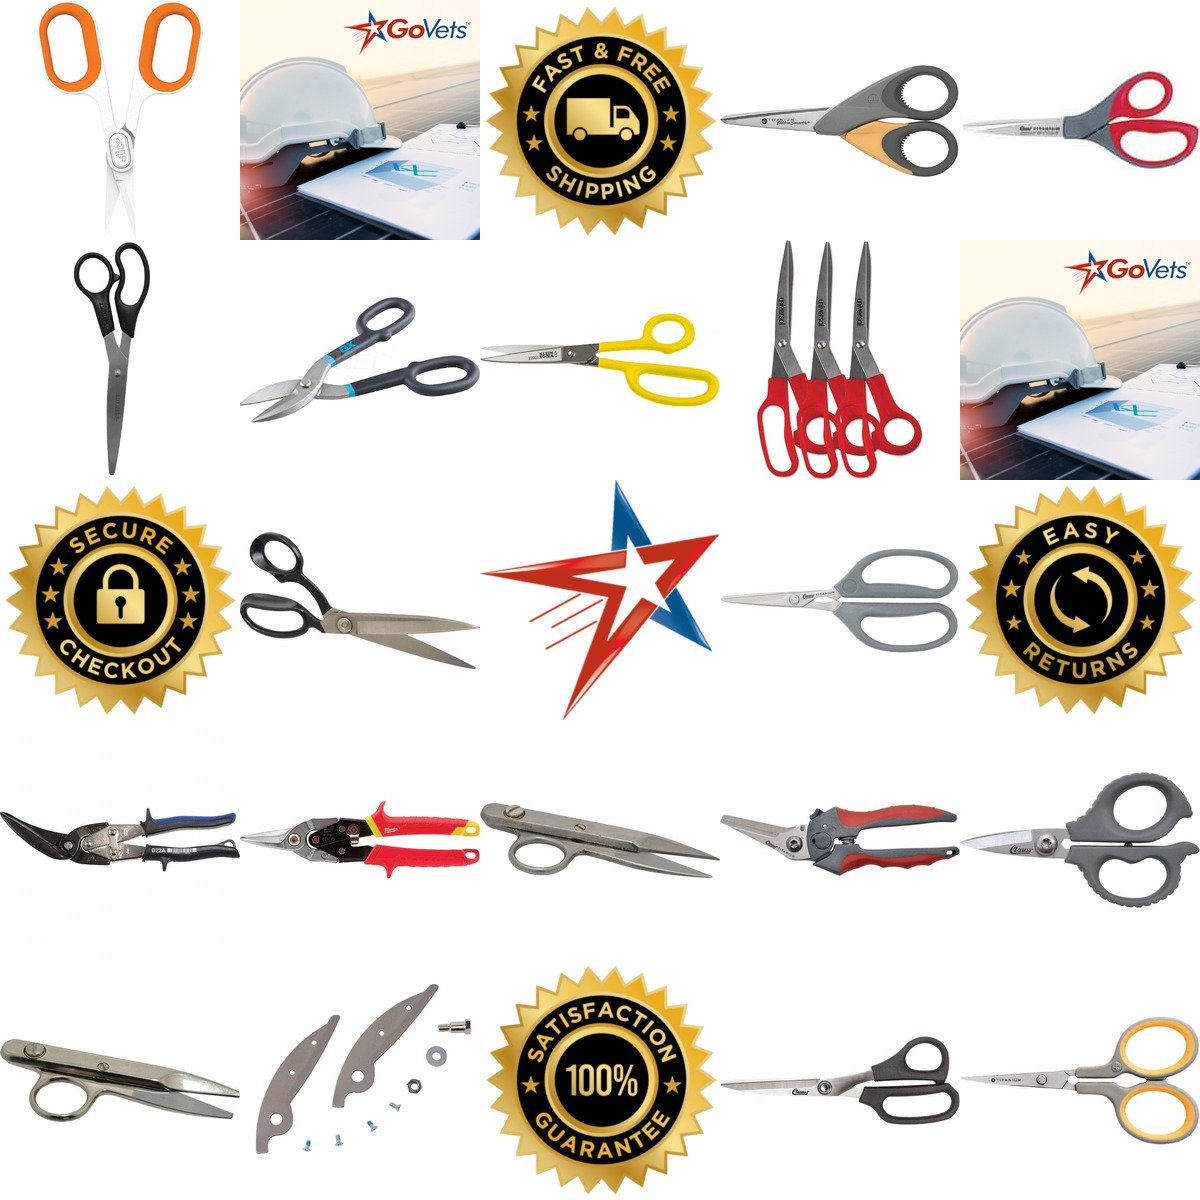 A selection of Snips and Shears products on GoVets